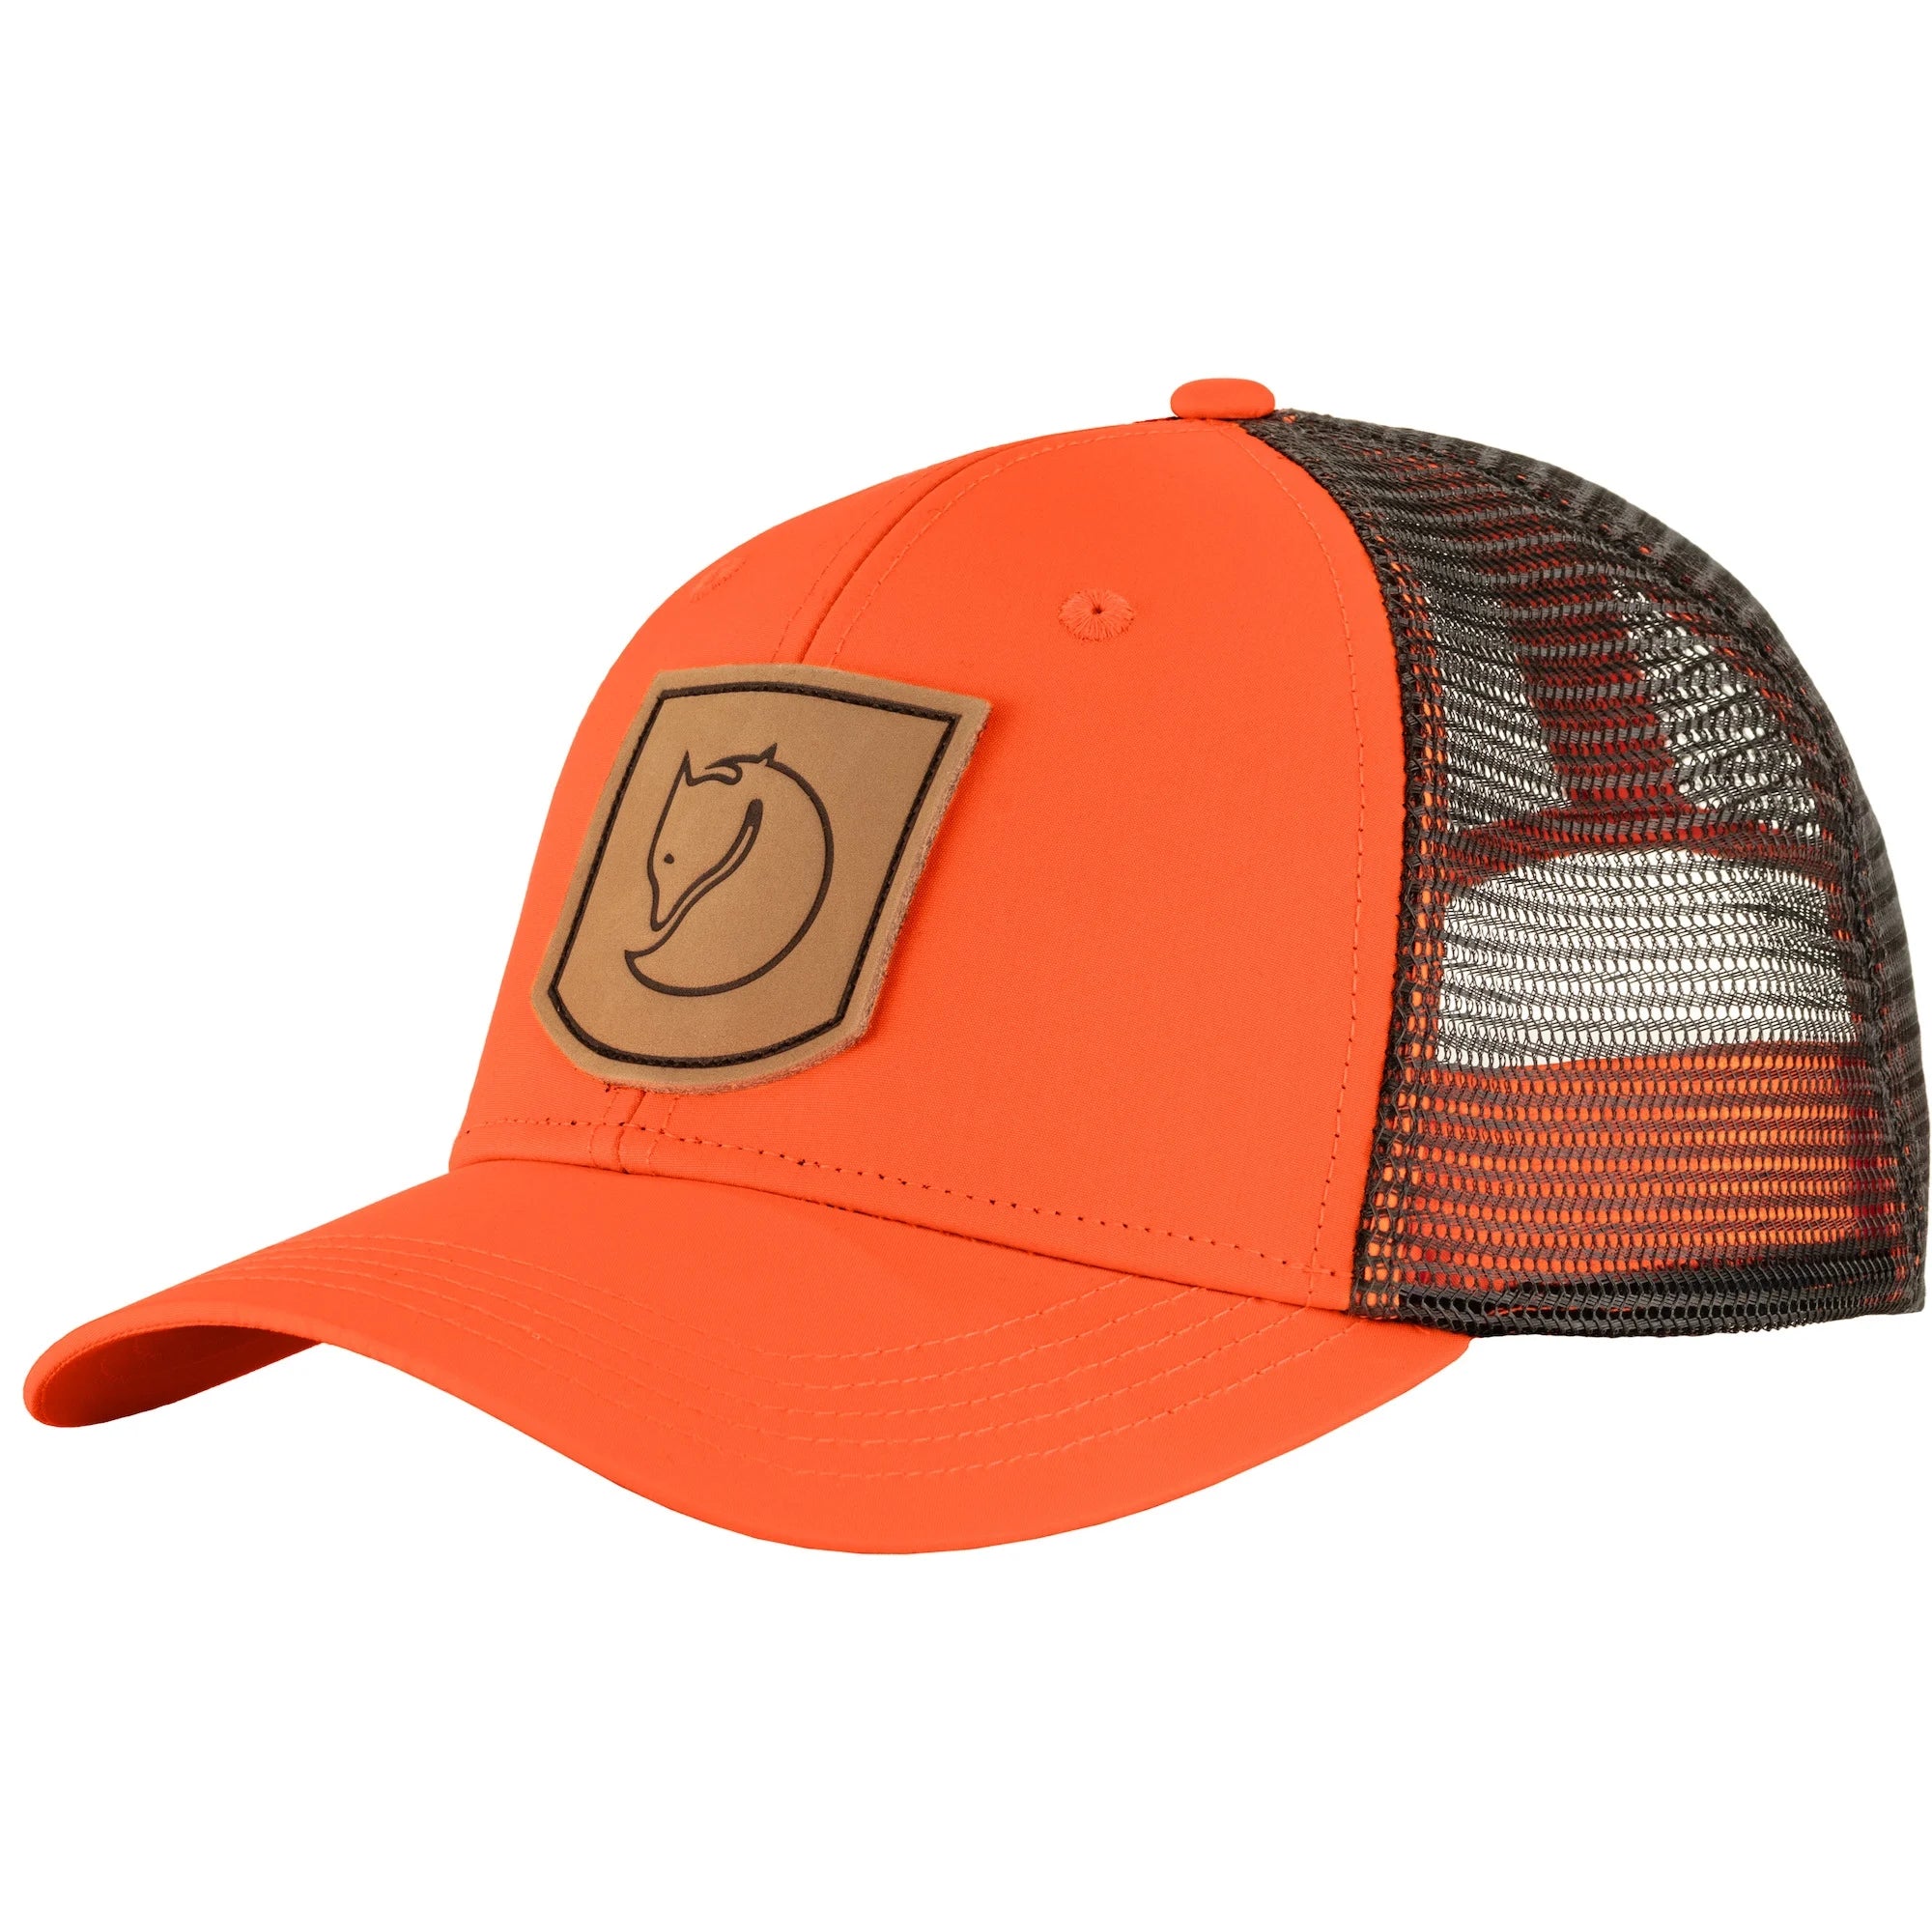 Safety Orange Trucker style hat with brown logo on front and black mesh back.